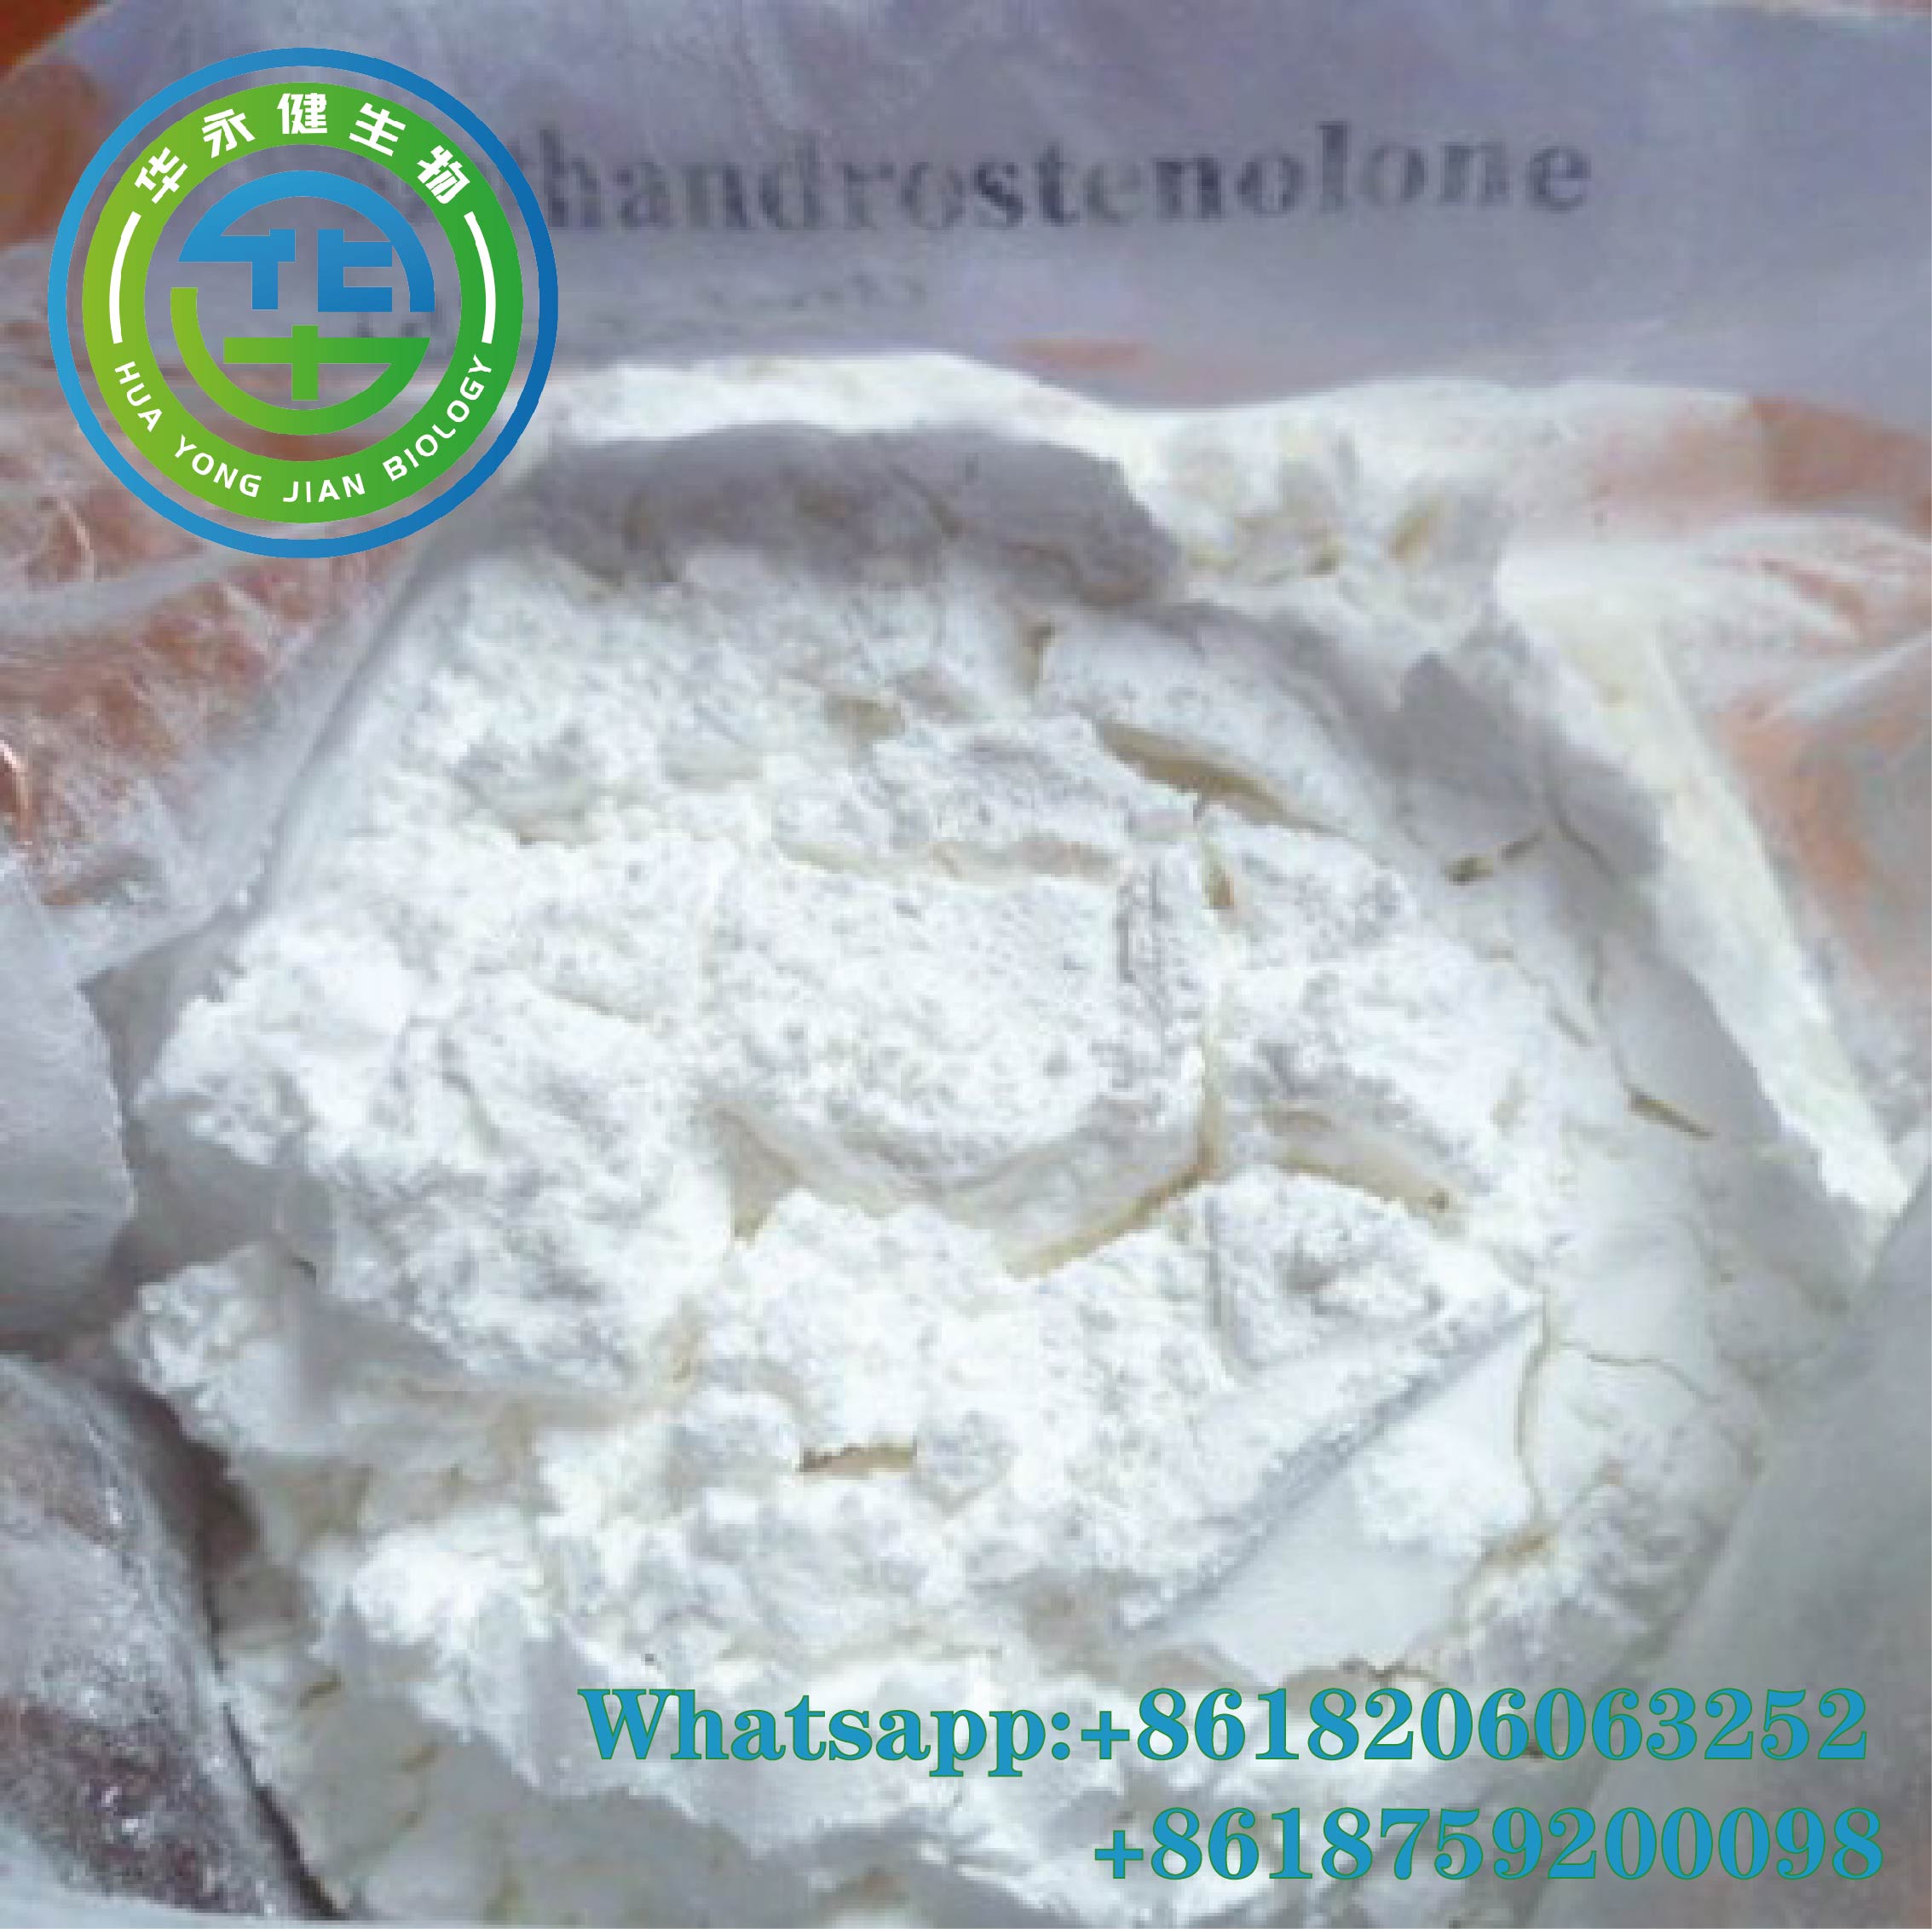 Safety Injectable Oral Anabolic Steroids Raw Medical Dianabol Metandienone Male Enhancement Powder CasNO.72-63-9